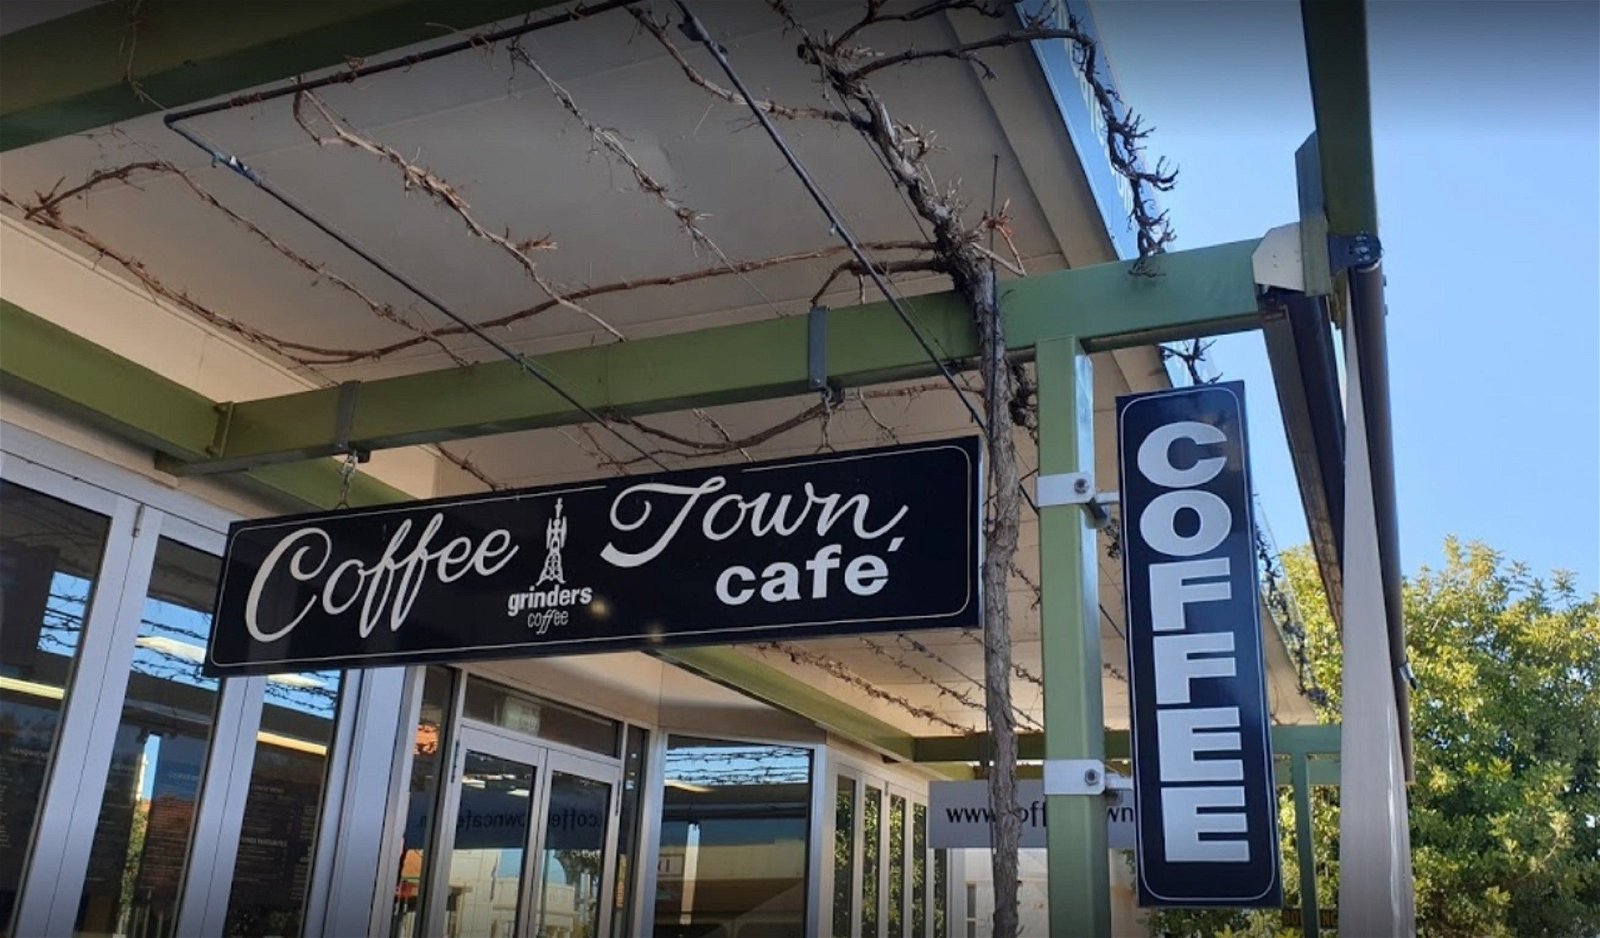 Coffee Town Cafe